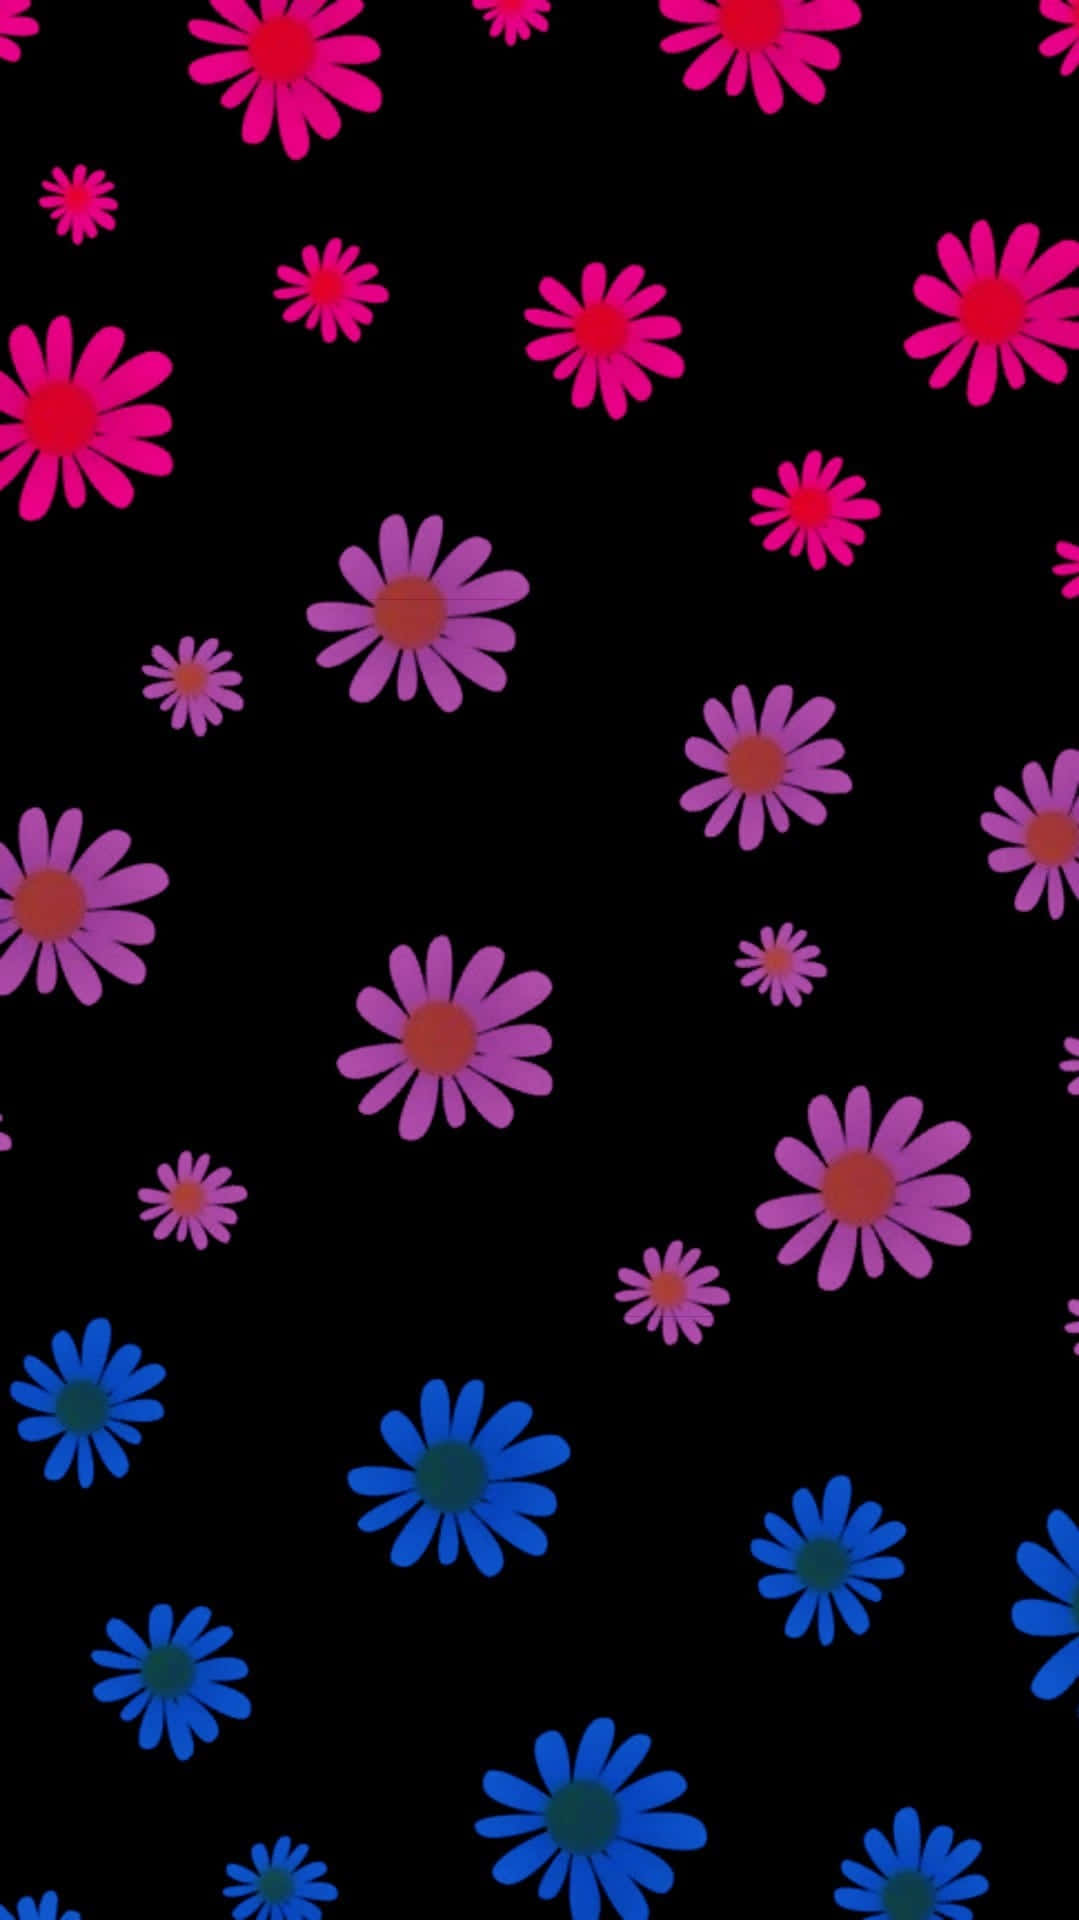 A Black Background With Pink And Blue Flowers